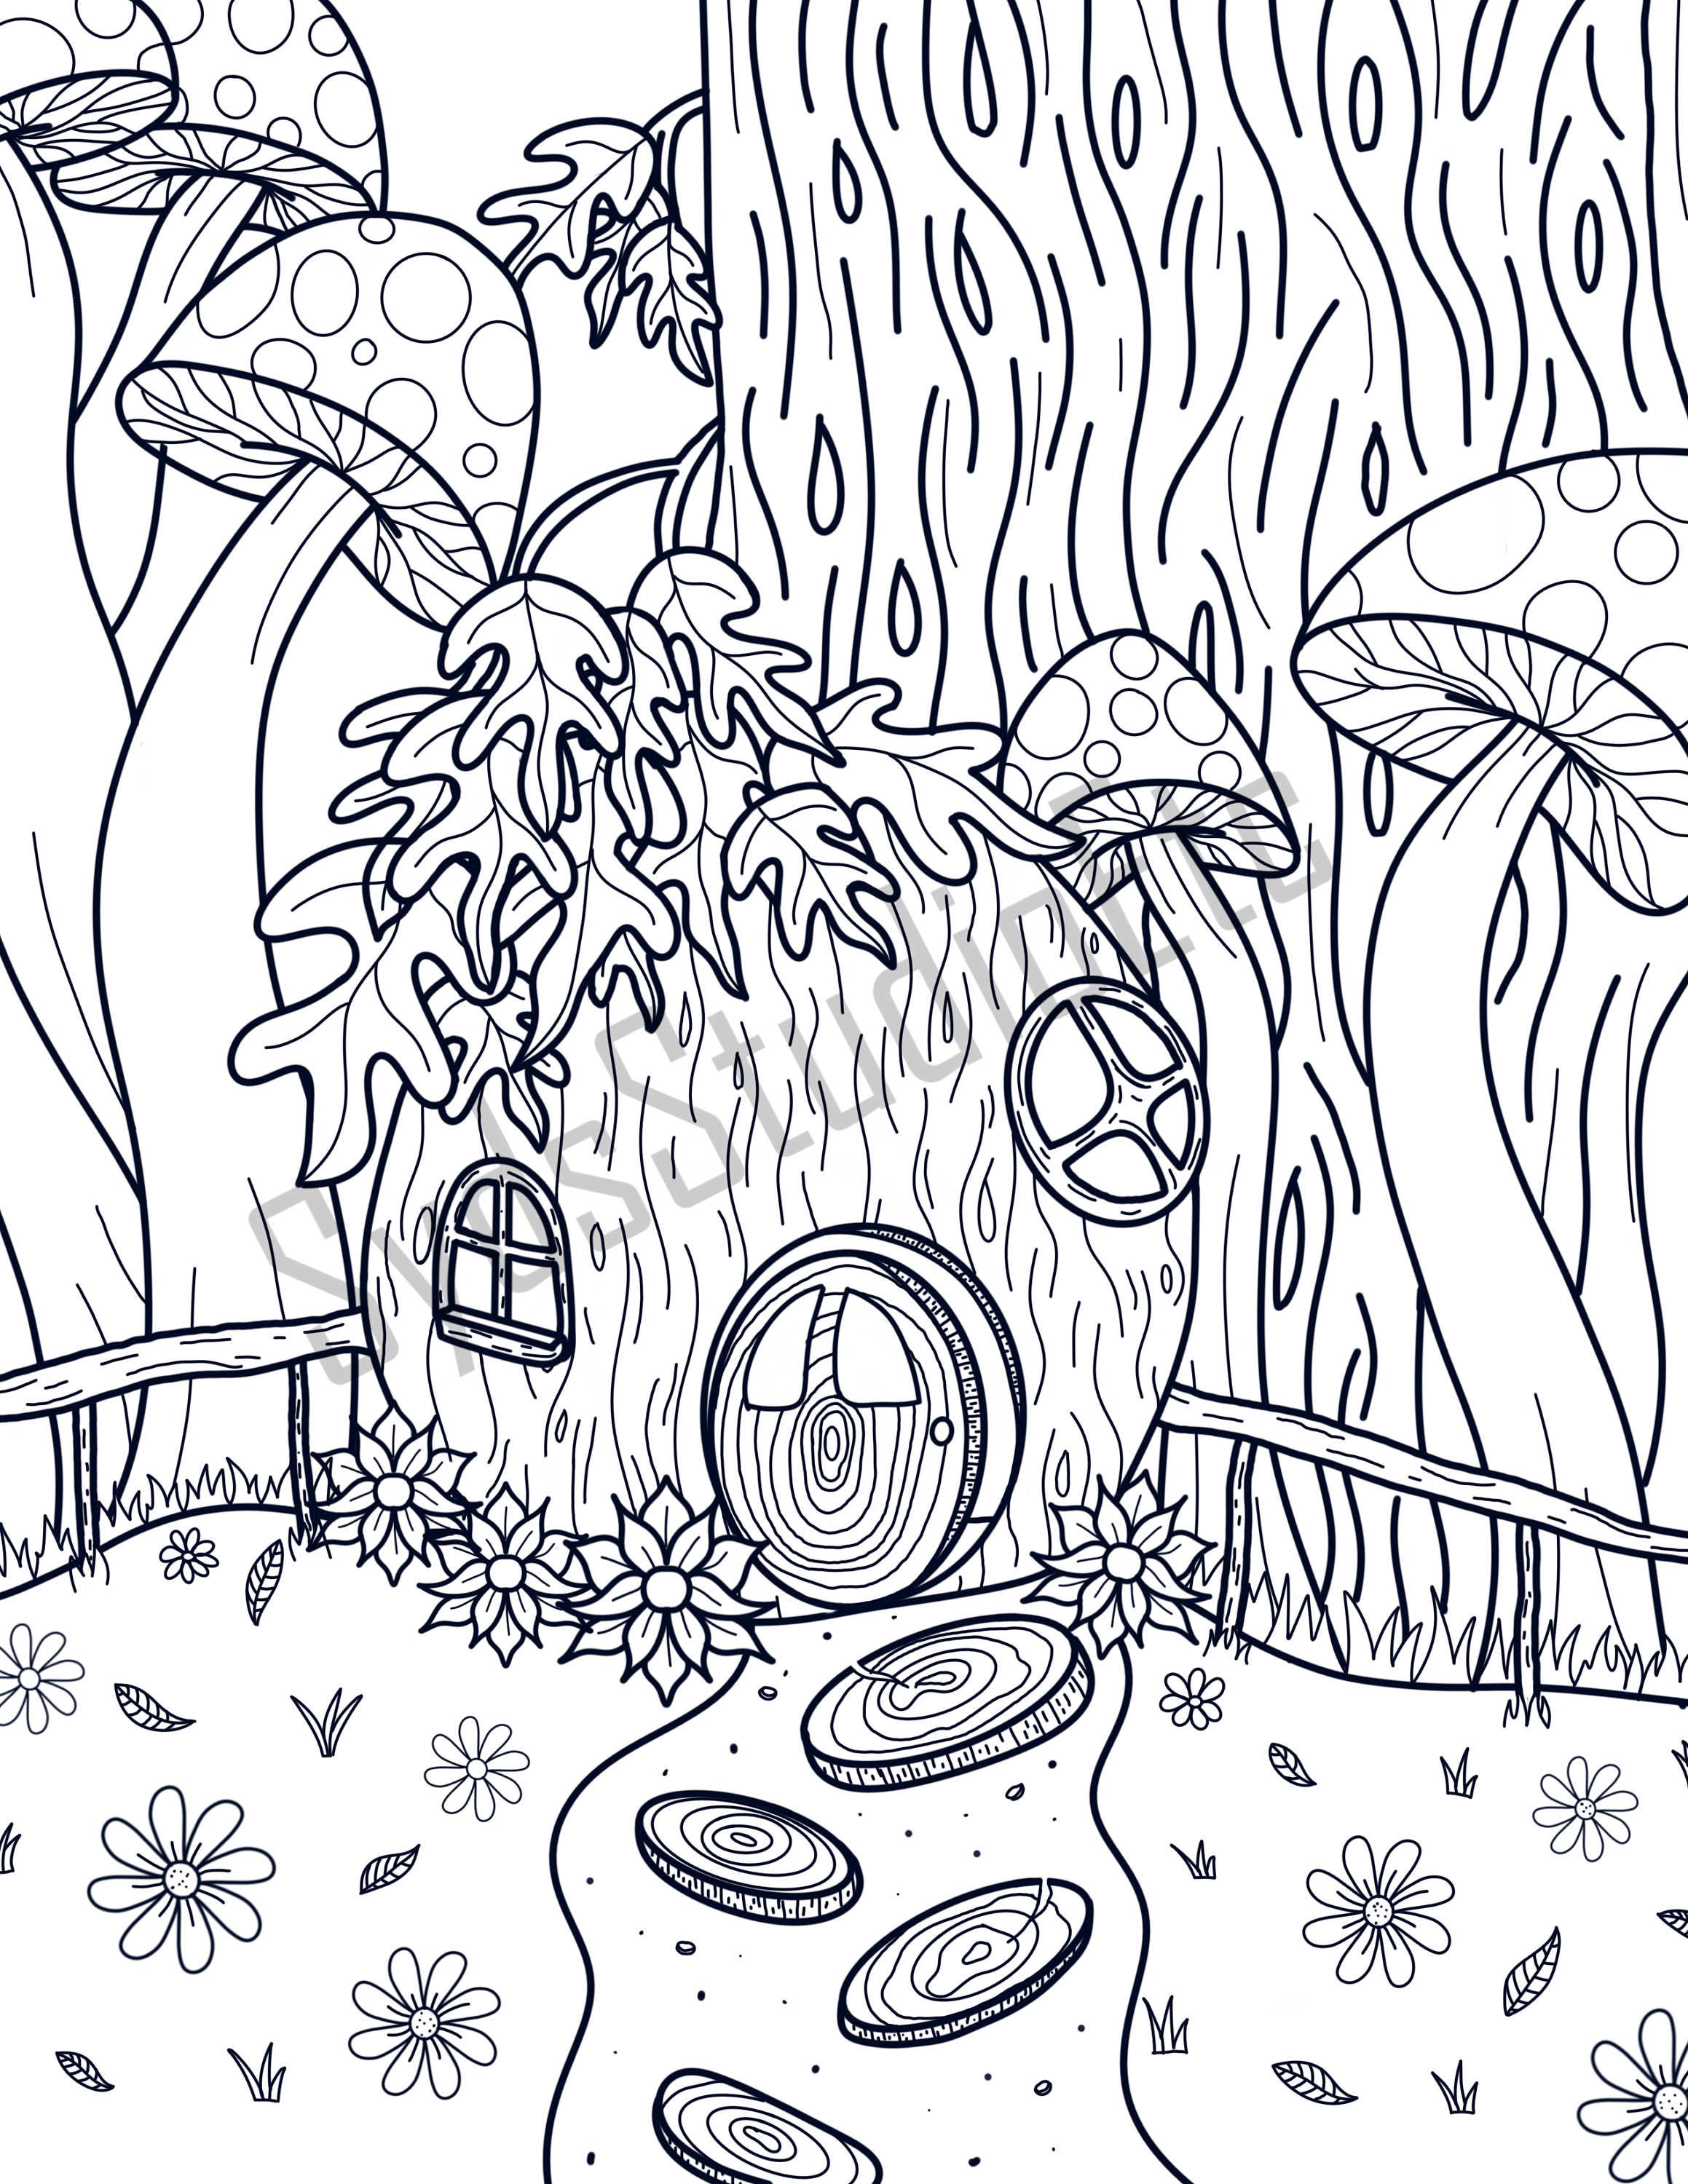 20+ Free Nature-Themed Adult Coloring Pages – Sustain My Craft Habit